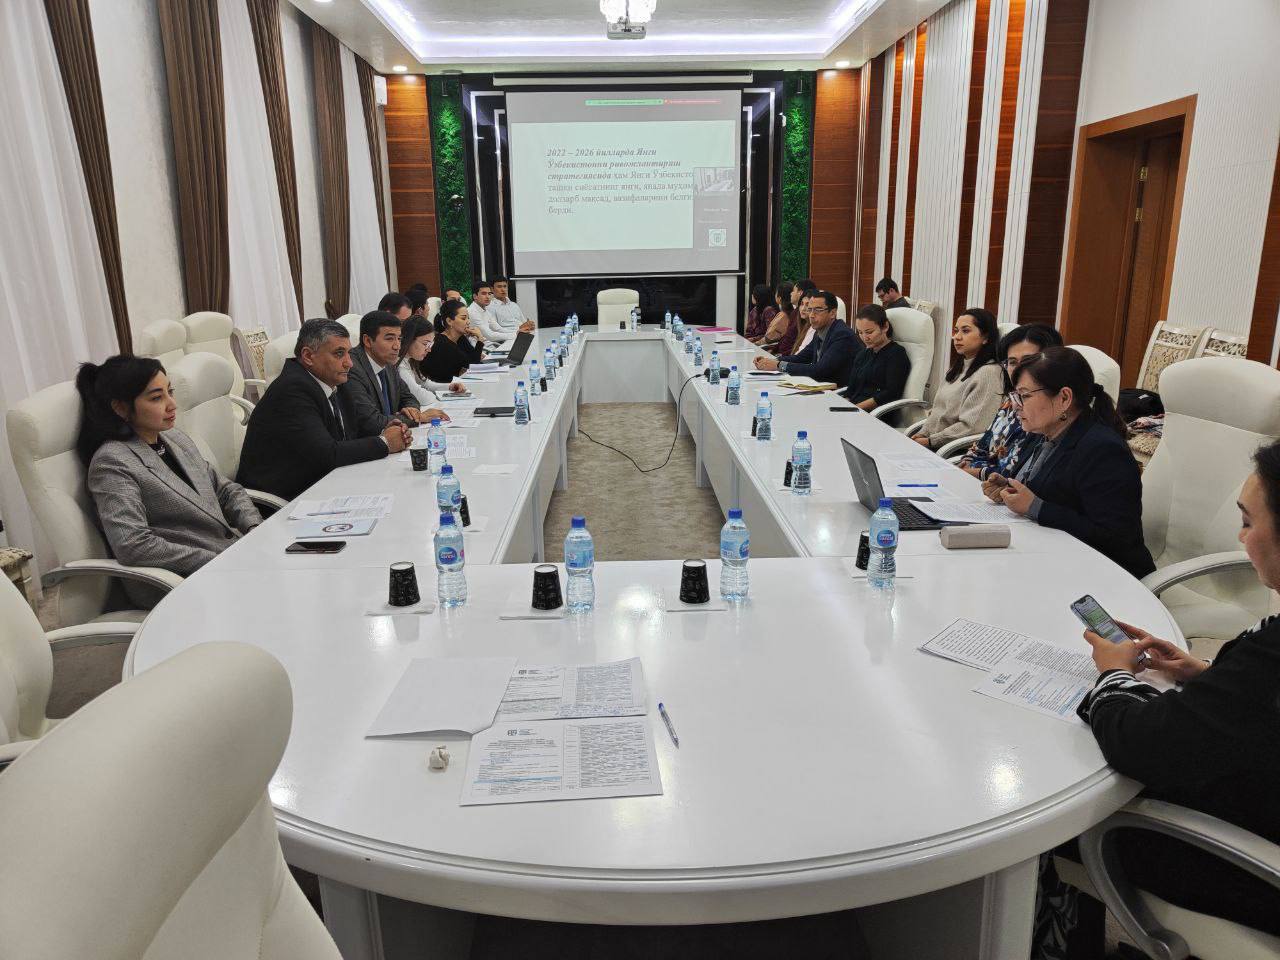 International round table discussion on “Constitutional reforms: the experience of the European Union and the countries of Central Asia” was held